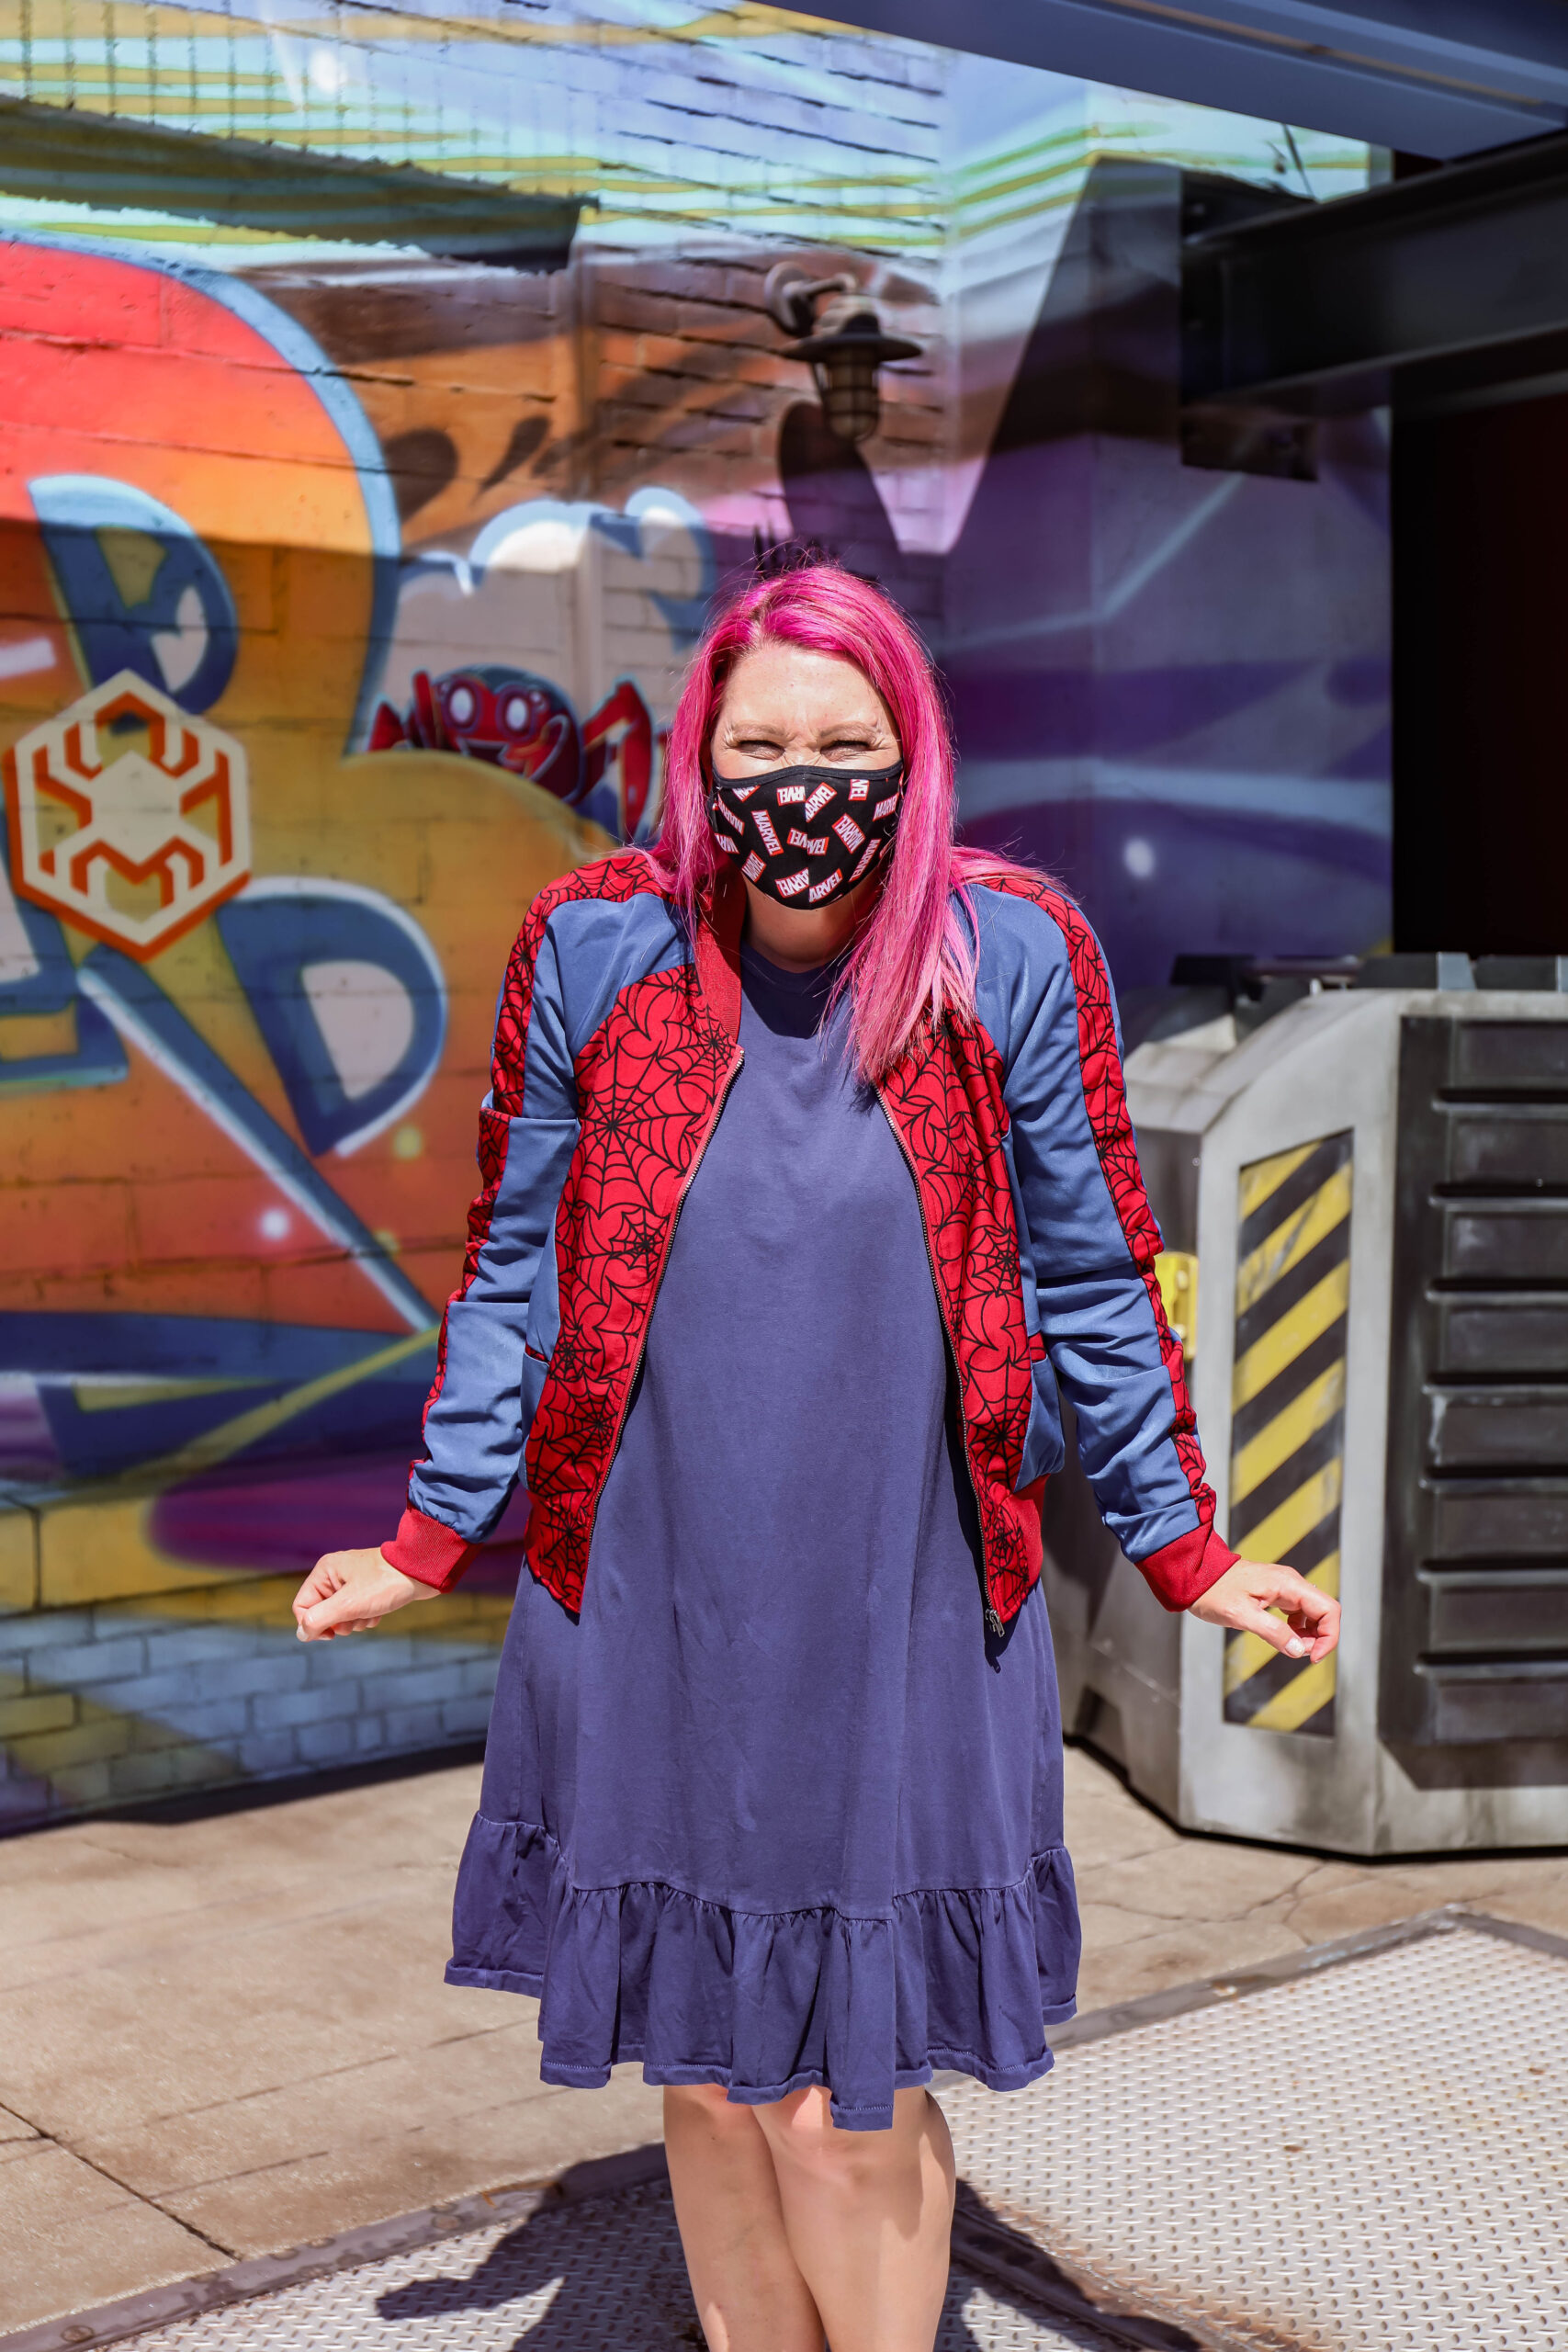 Looking for the best Disneyland Outfits to wear inside Avengers Campus? This is for YOU!